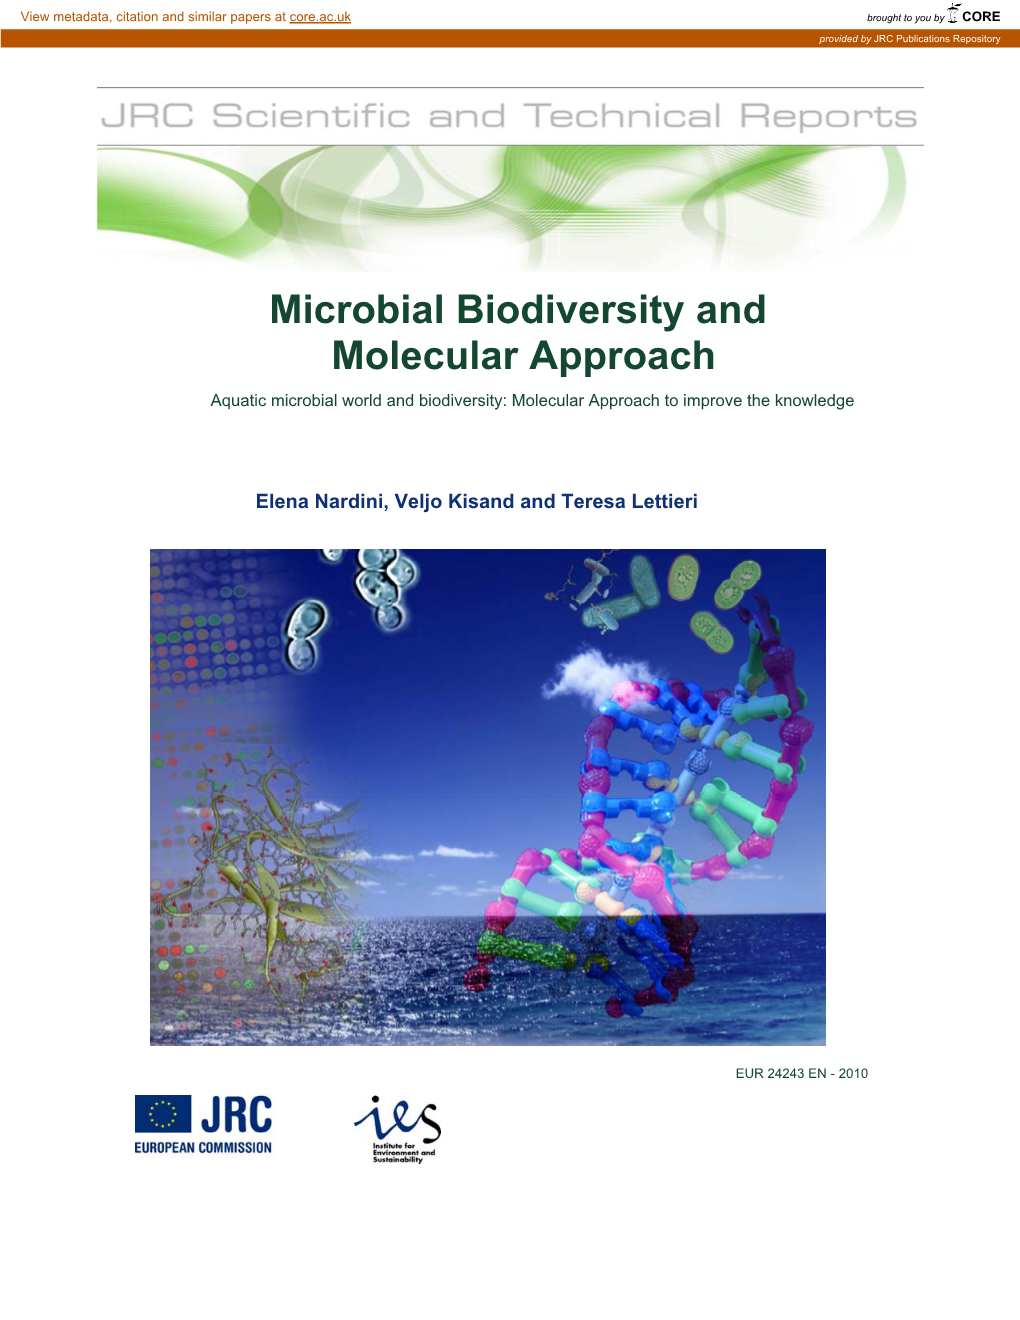 Microbial Biodiversity and Molecular Approach